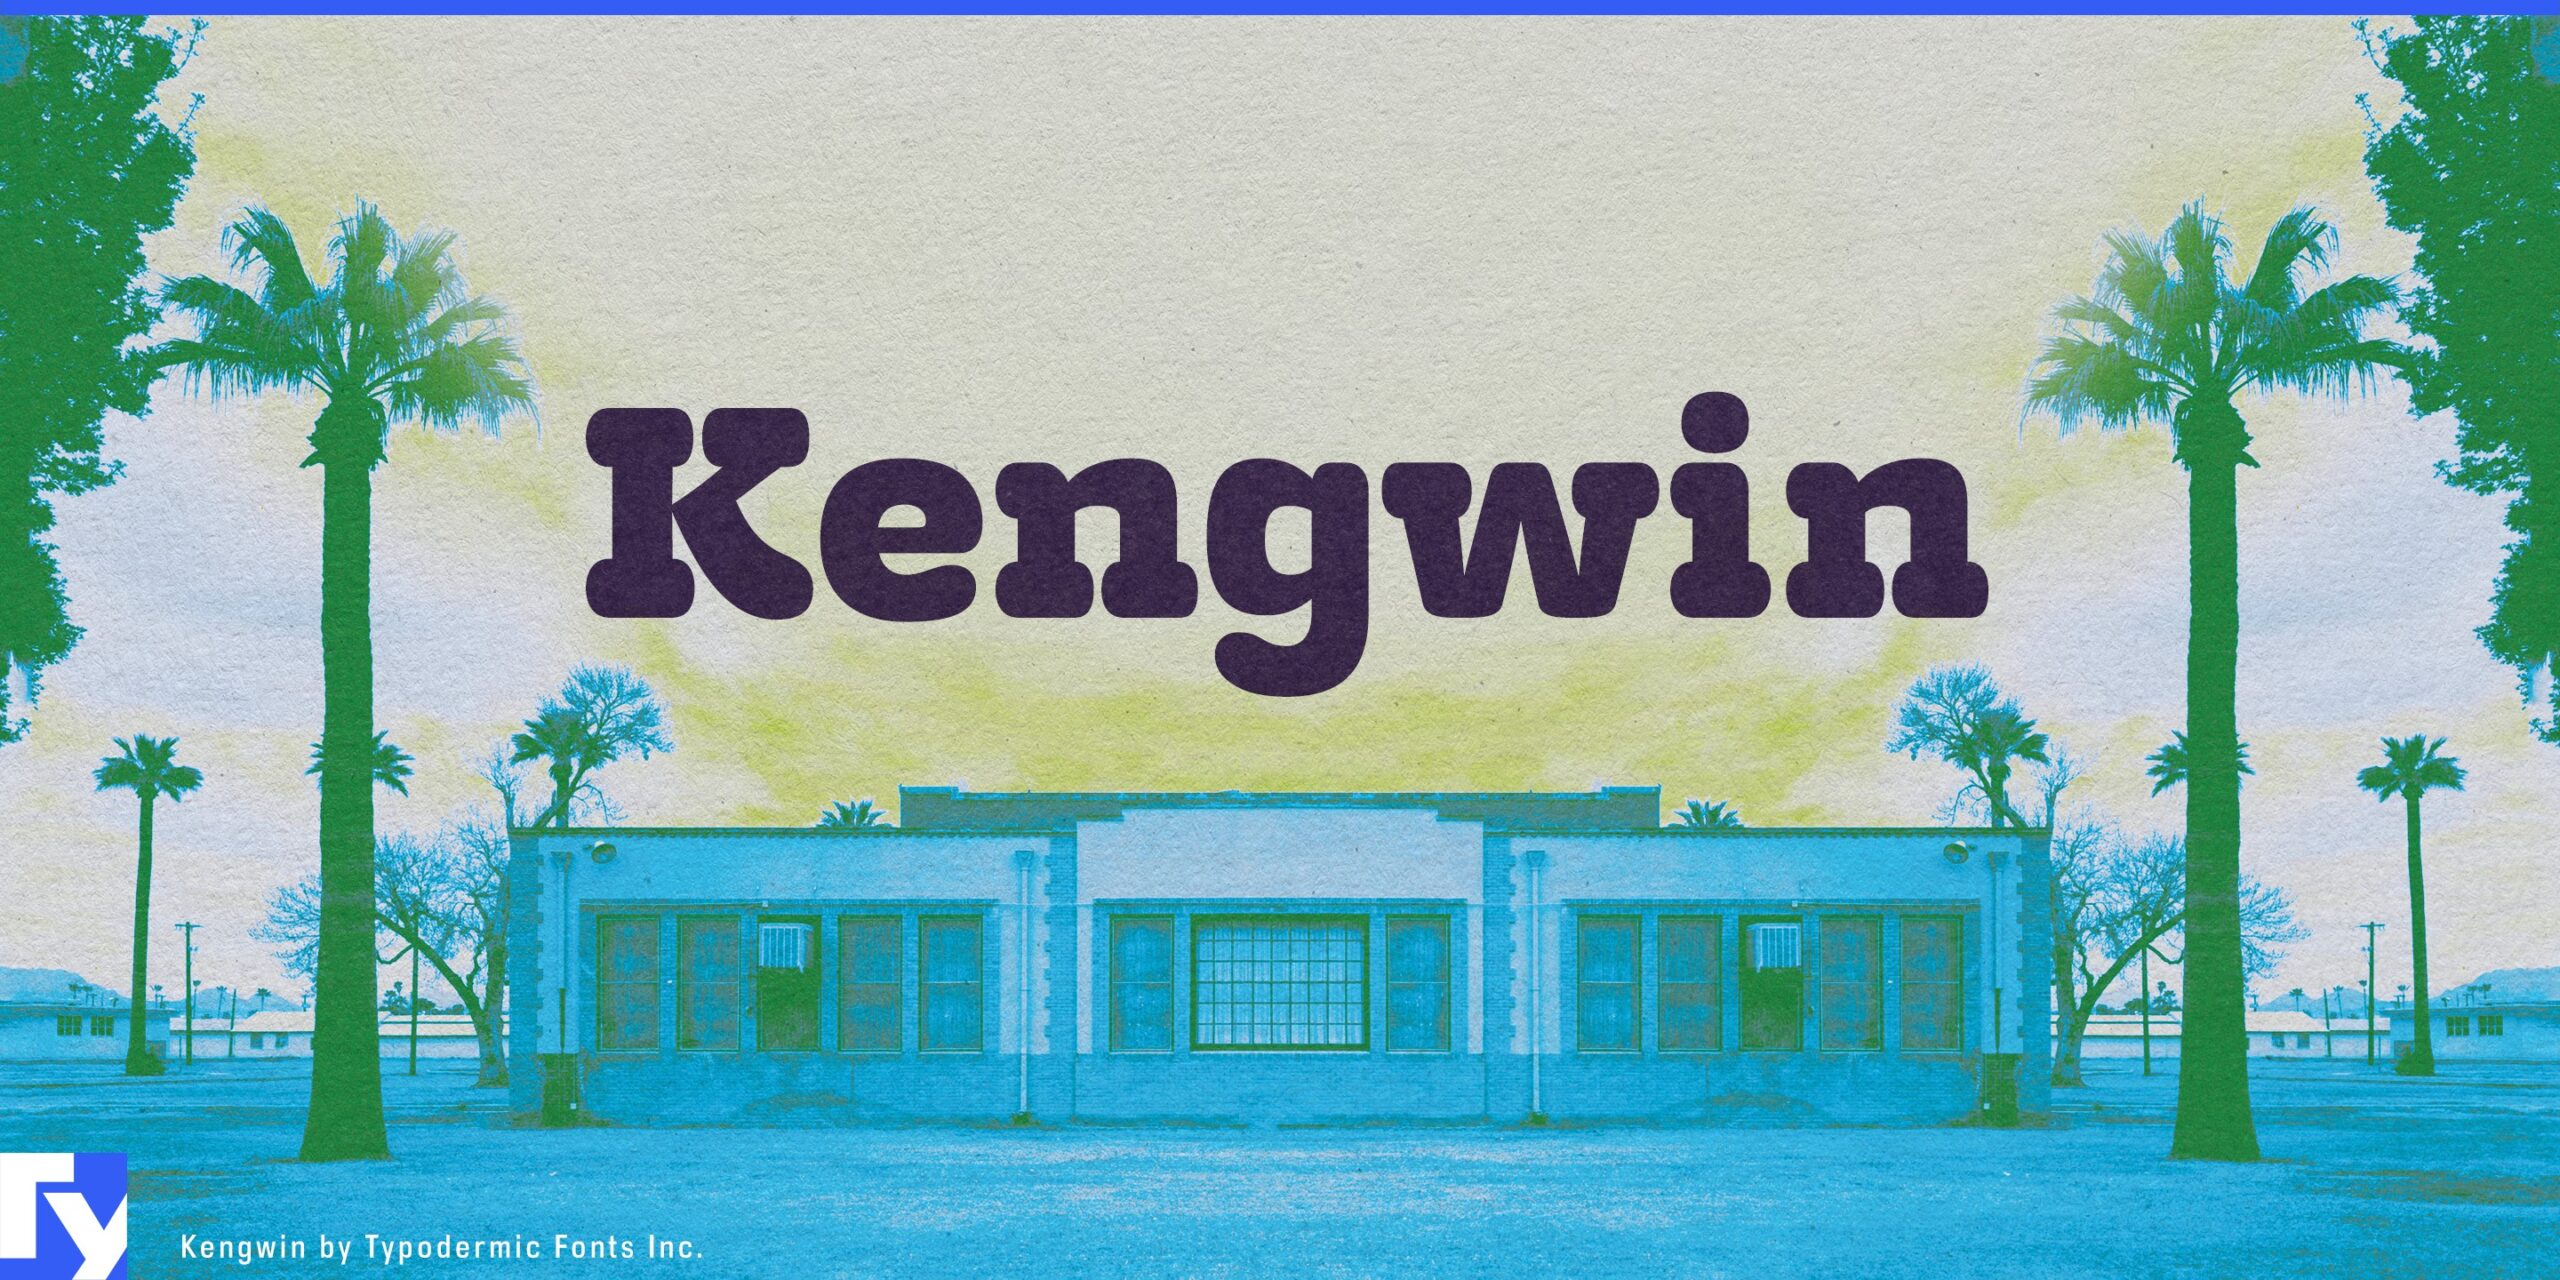 Power and Conviction: Kengwin Typeface Makes a Statement